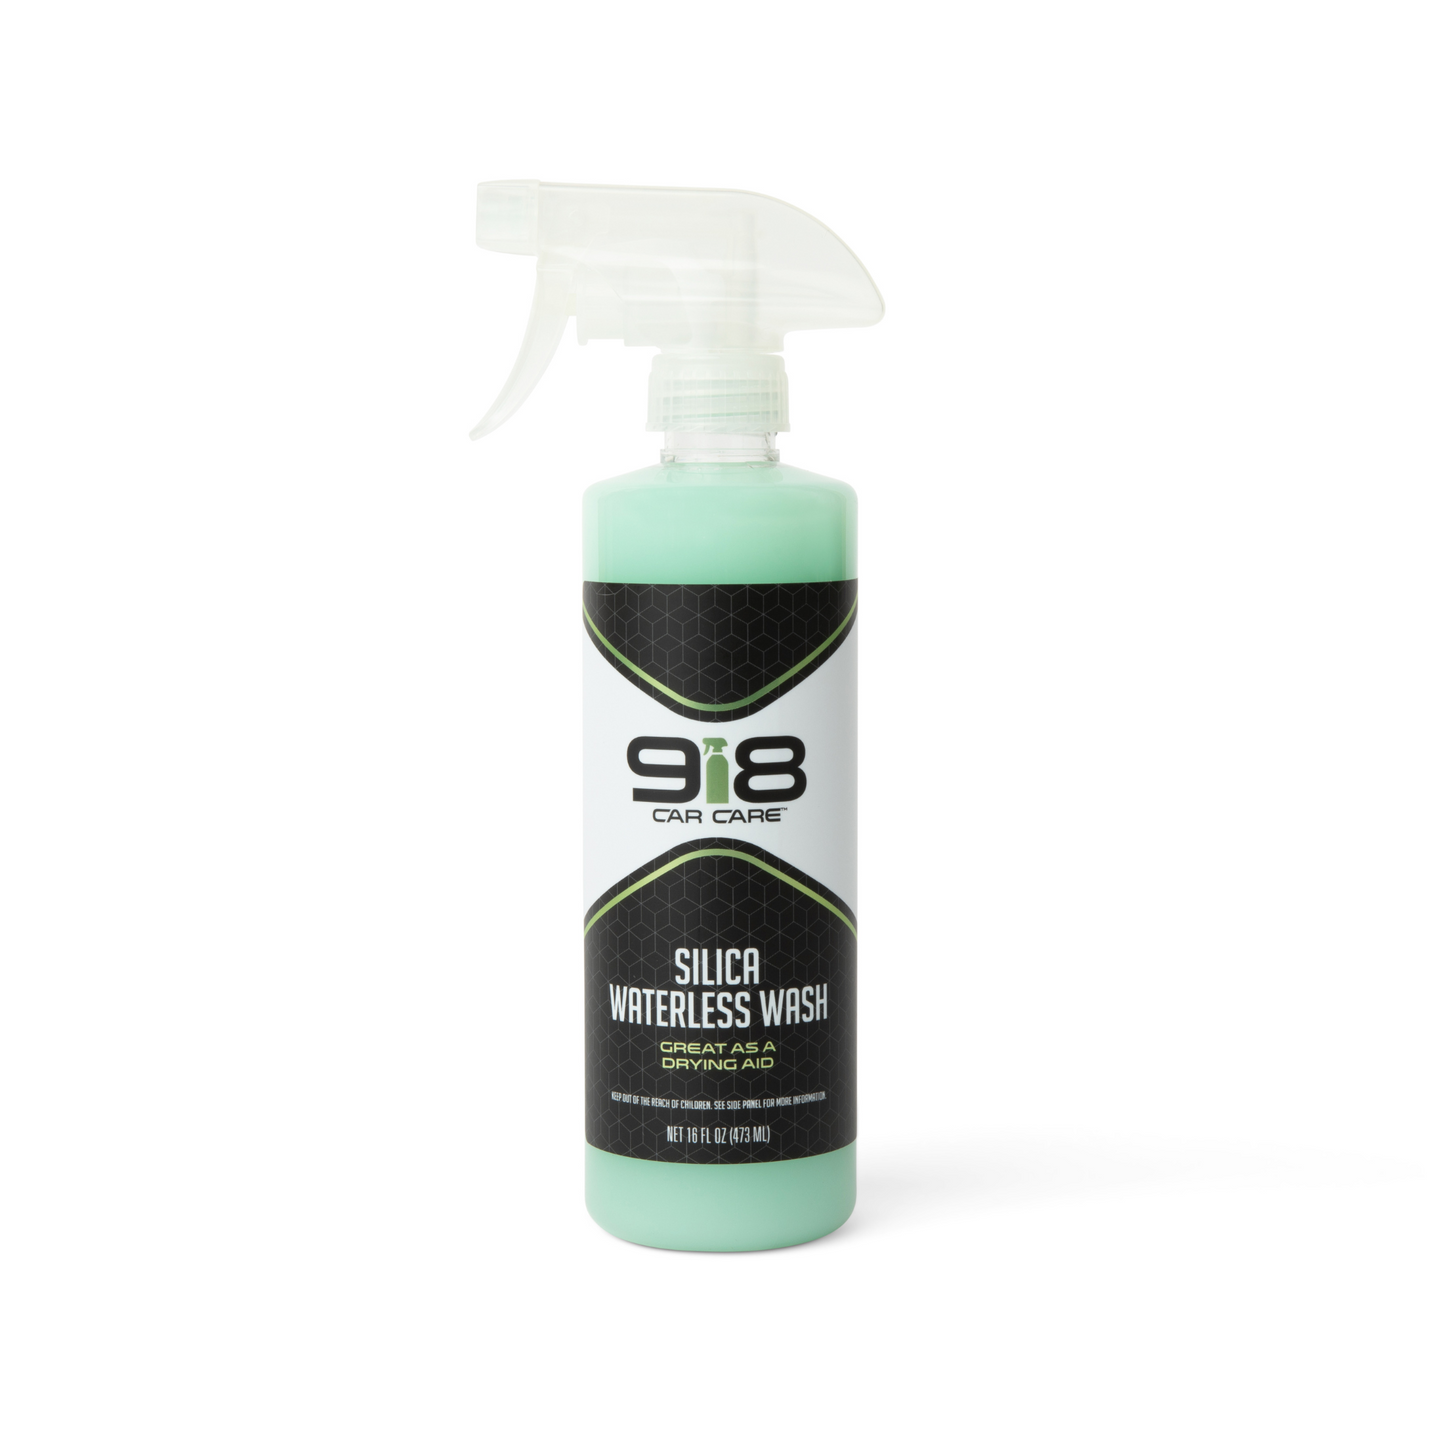 Silica Waterless Wash - Use as a Drying Aid